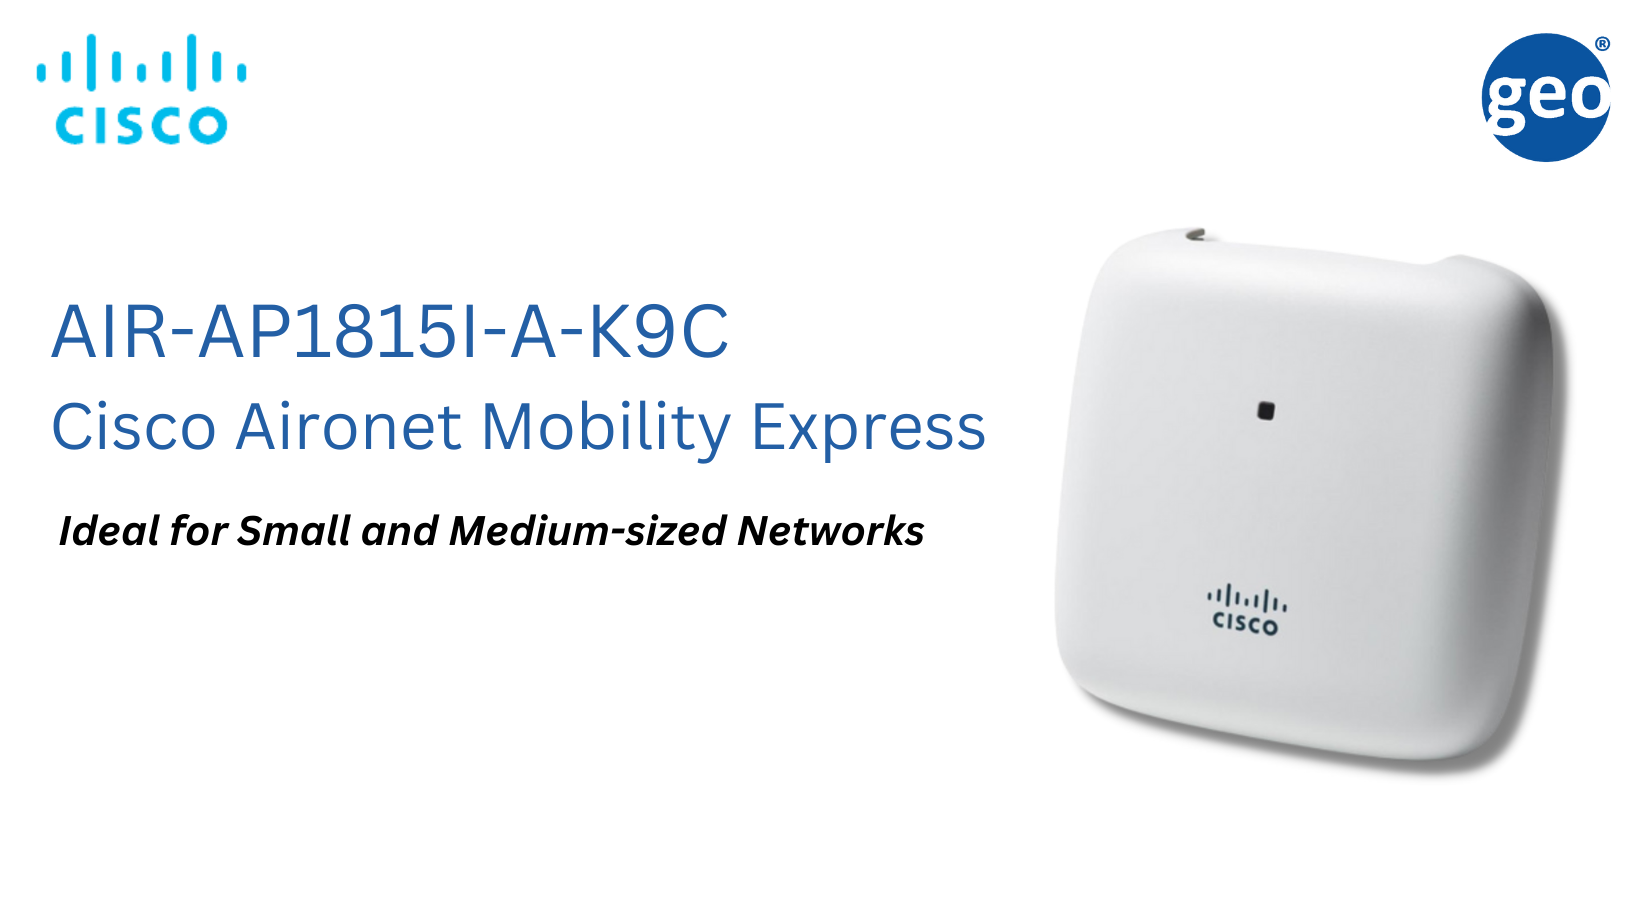 Cisco: AIR-AP1815I-B-K9C brings a full slate of Cisco high-performance functionality to the enterprise environment.